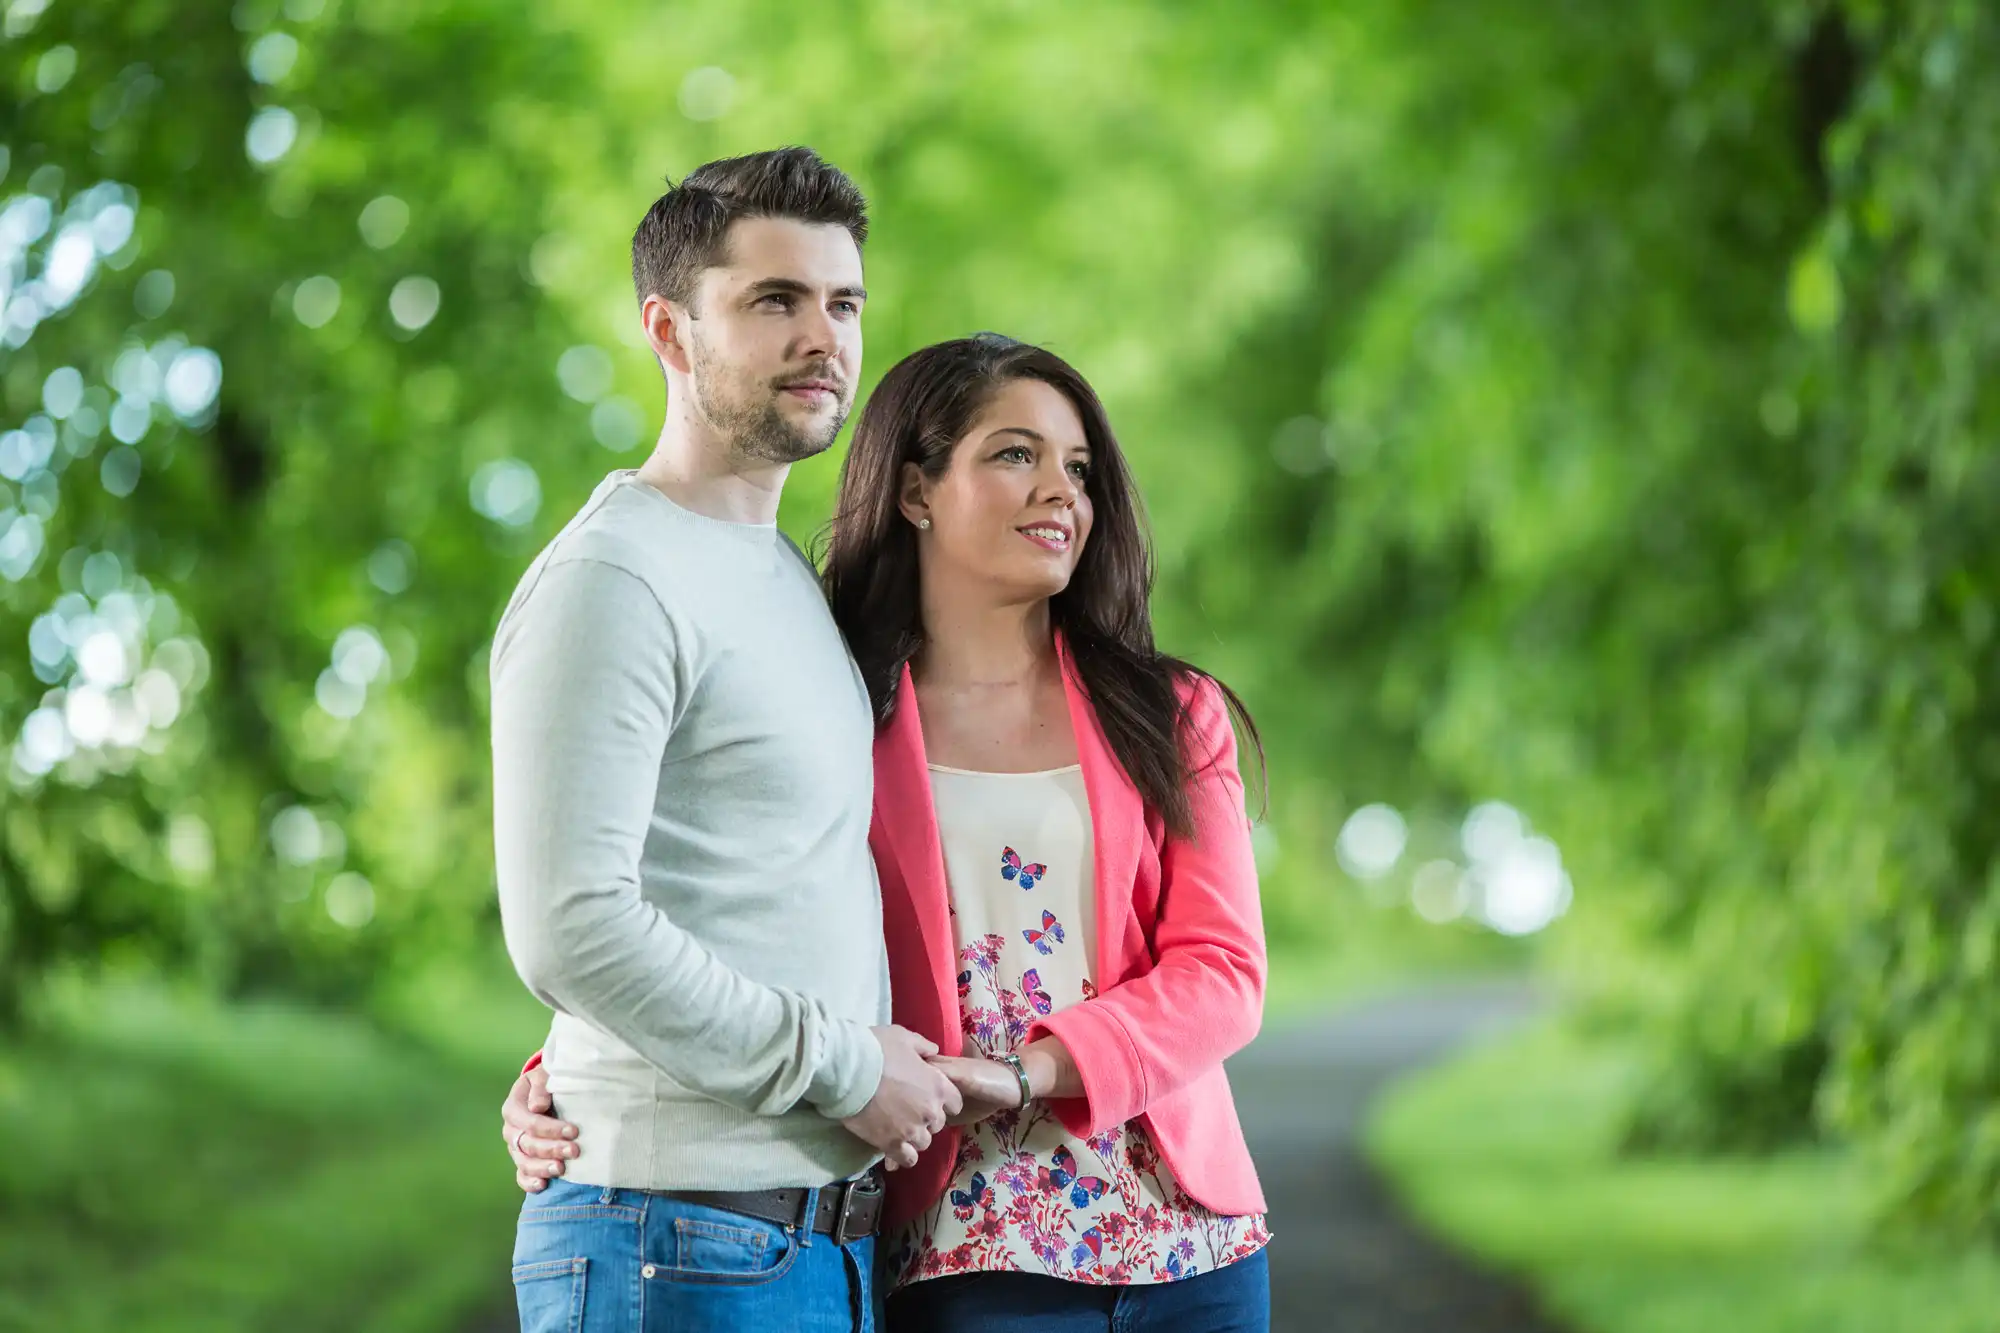 A couple embracing each other, standing on a leafy path in a park, smiling and looking away from the camera.